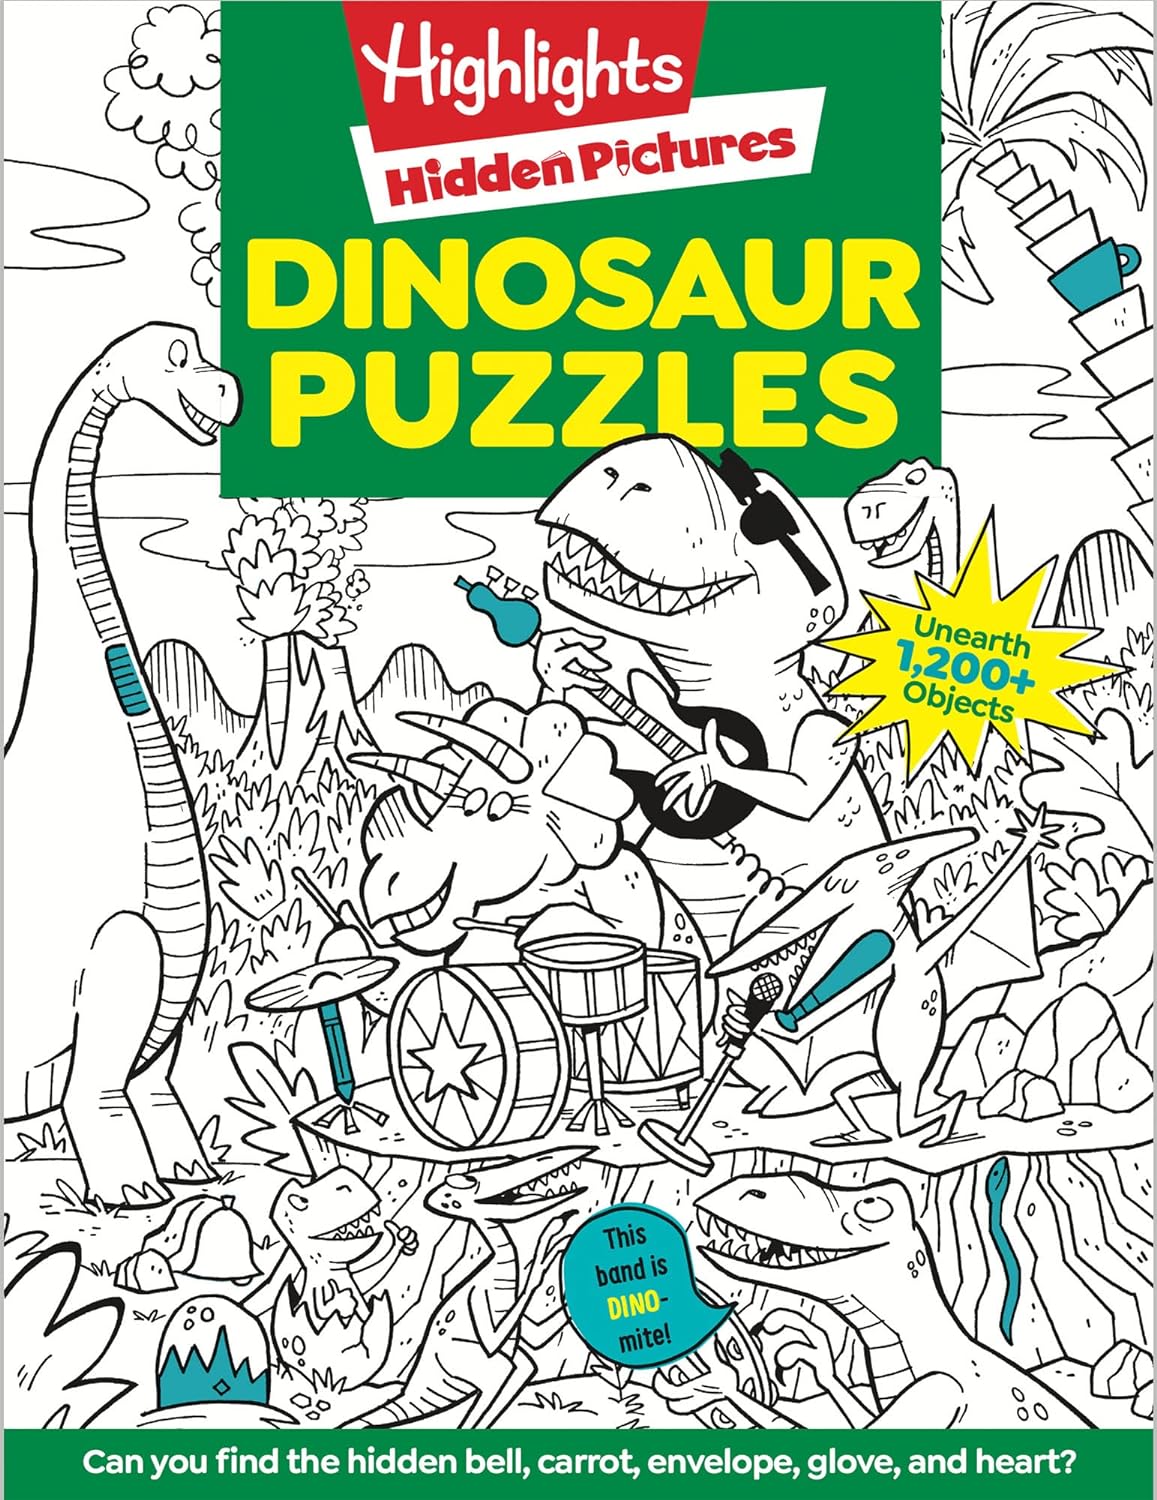 Highlights Hidden Pictures Dinosaur Puzzles